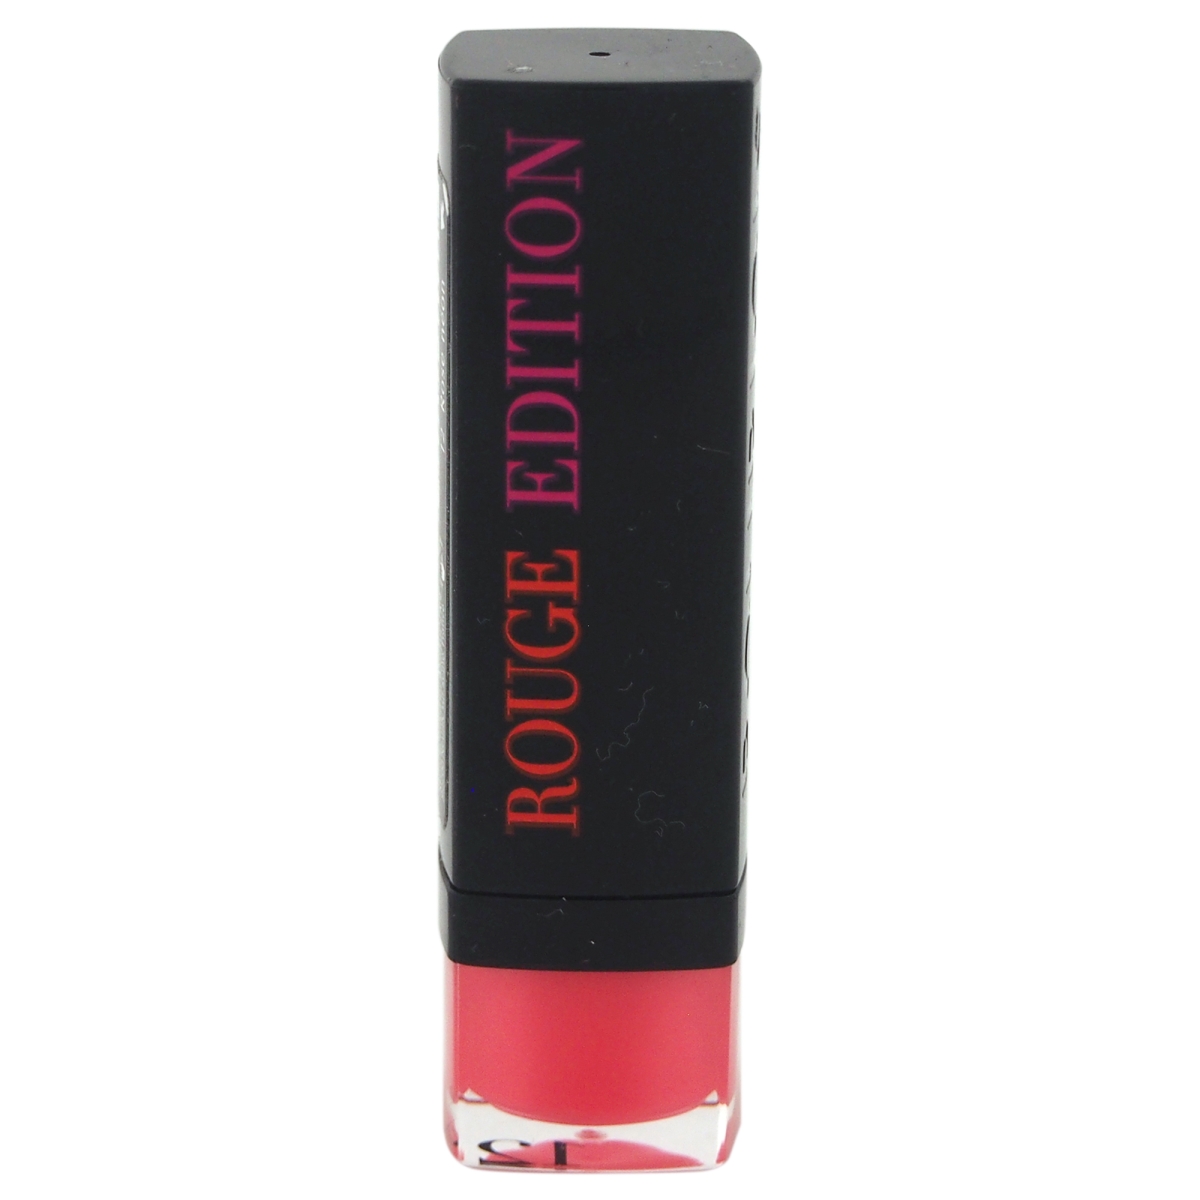 W-c-9699 0.12 Oz No. 12 Rouge Edition Rose Neon Lipstick For Women